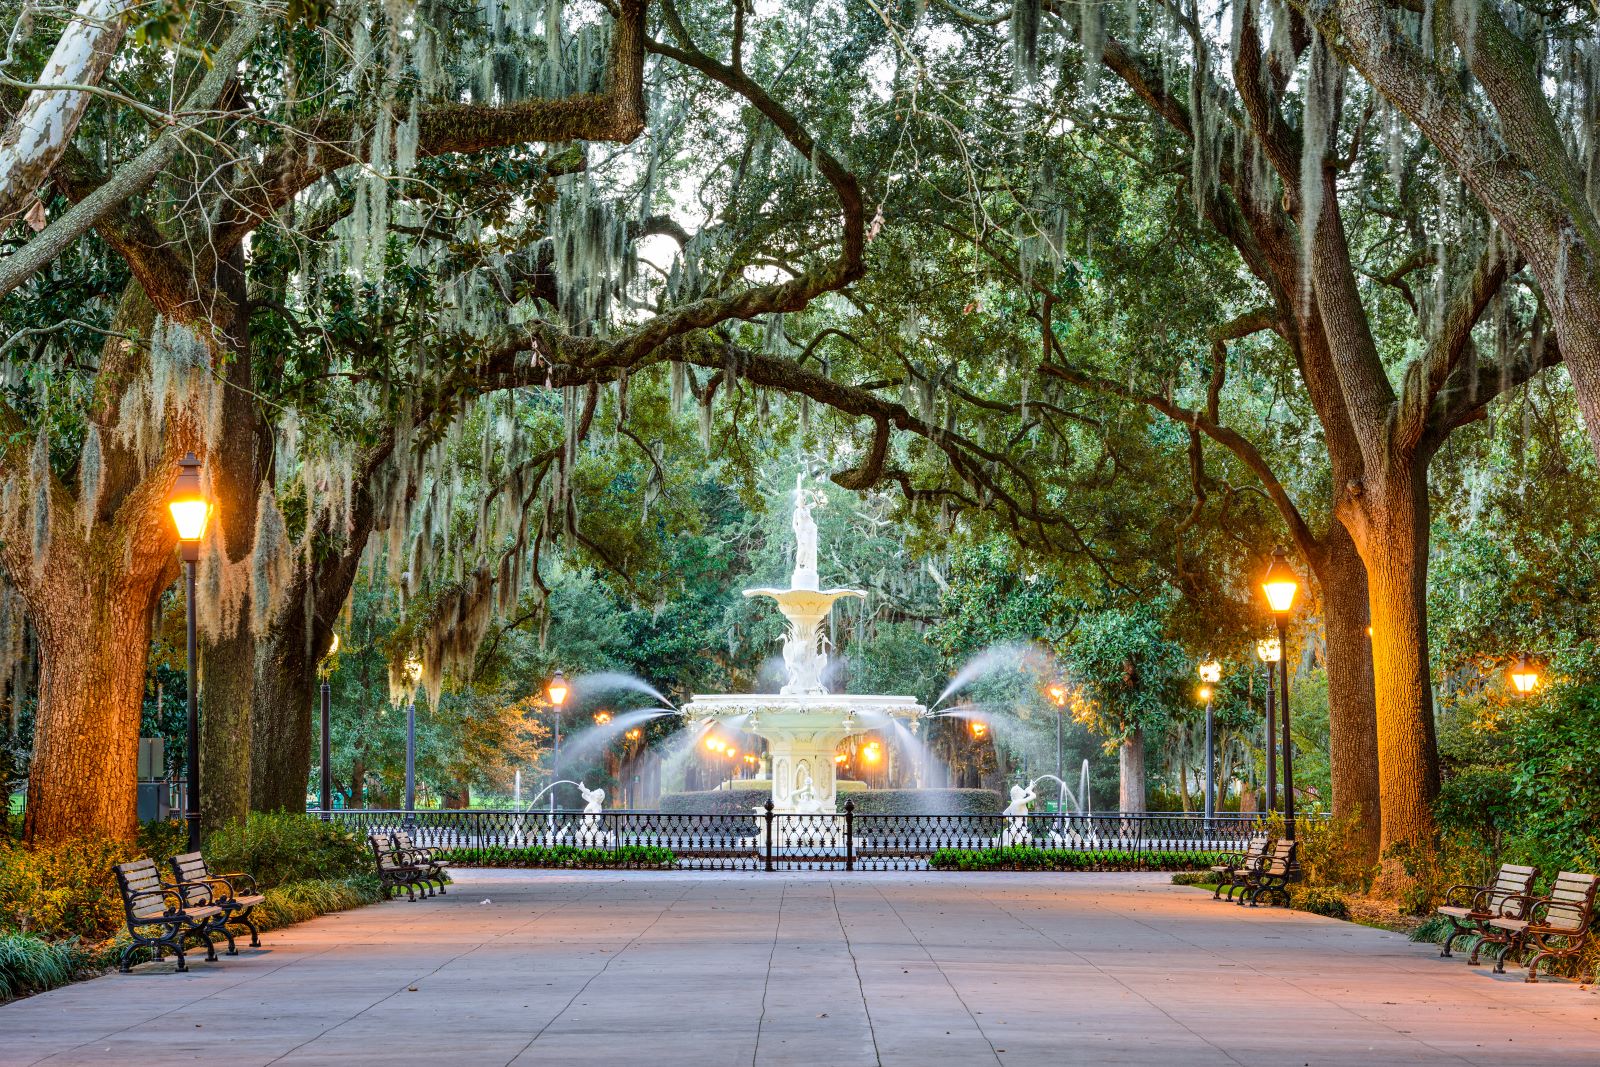 Image credit: Shutterstock / Sean Pavone <p>With its charming squares and historic architecture, Savannah is budget-friendly. Spend about $50 a day to explore this beautiful city.</p>